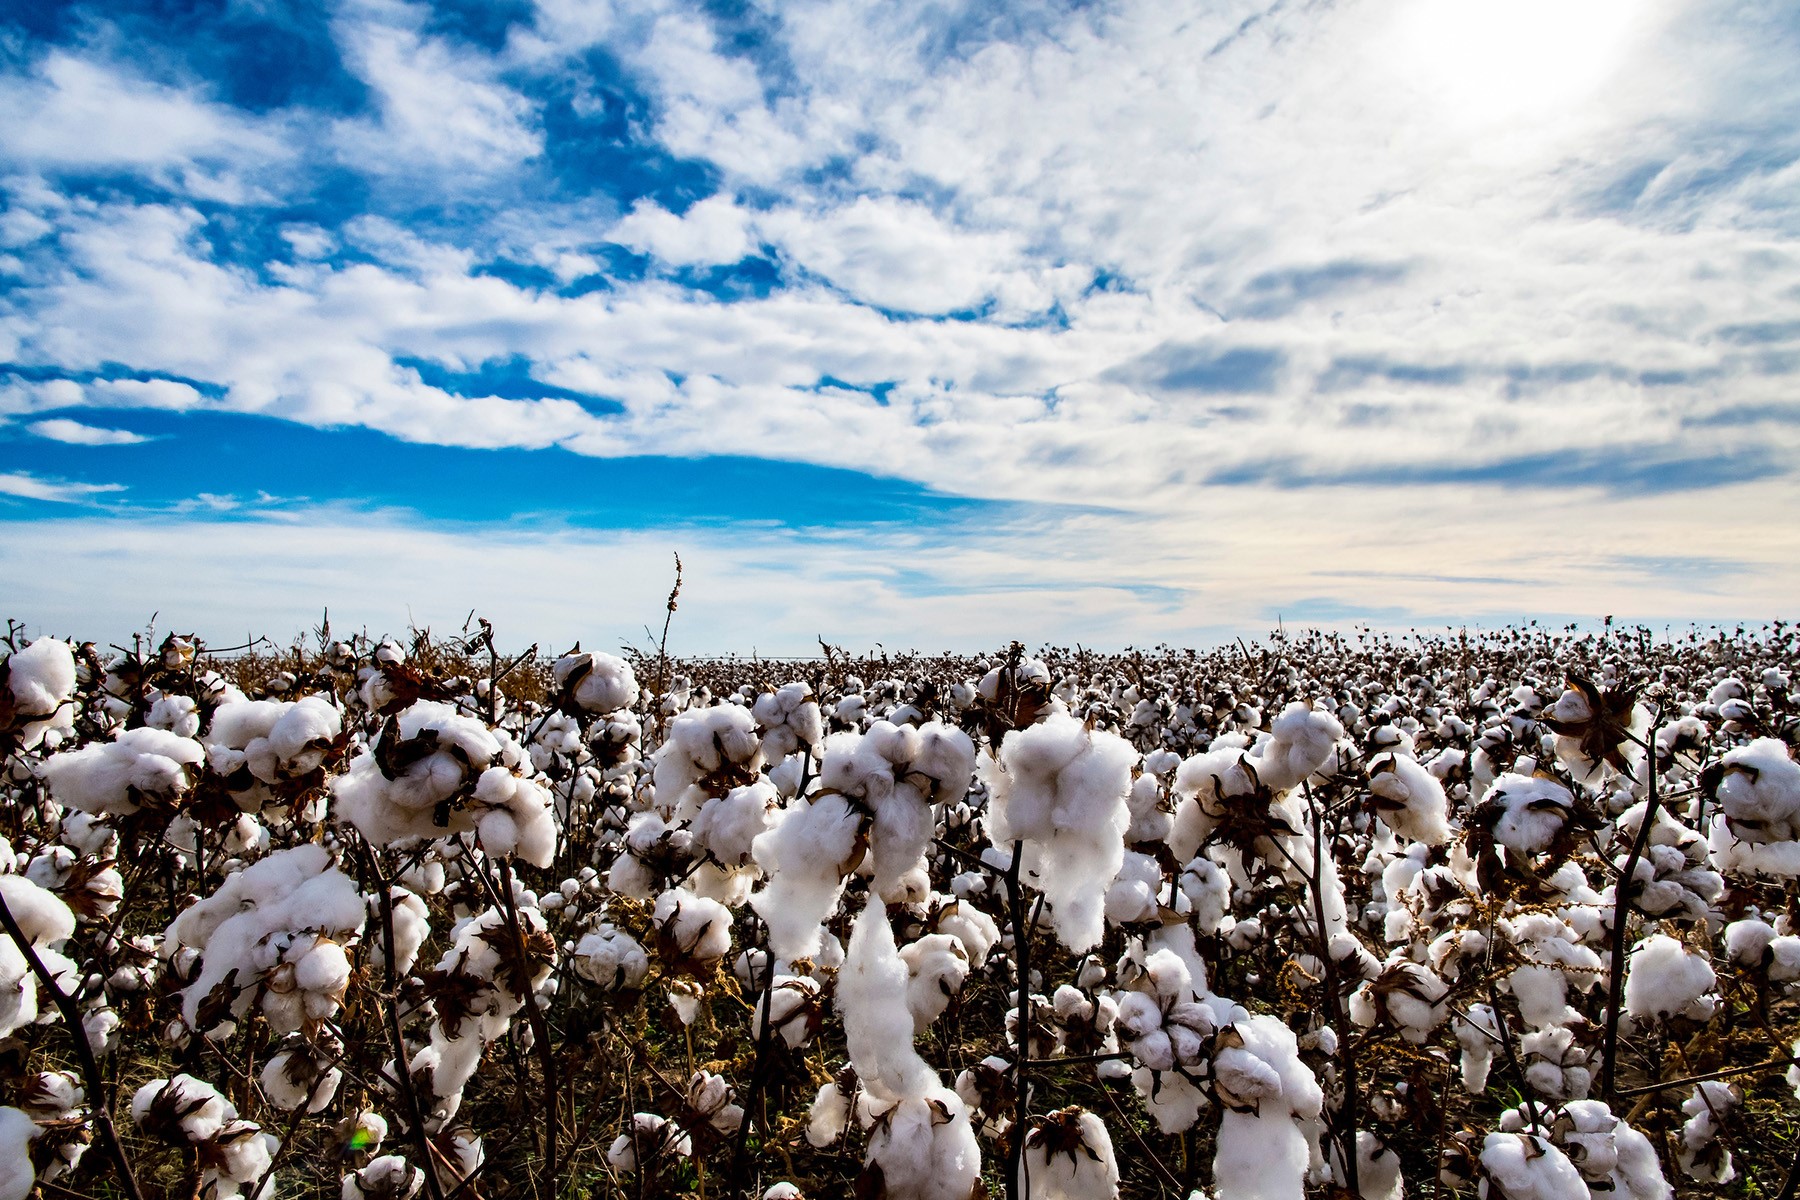 Oklahoma State University Invites Cotton Producers to Partcipate in New Cotton Webinar Series